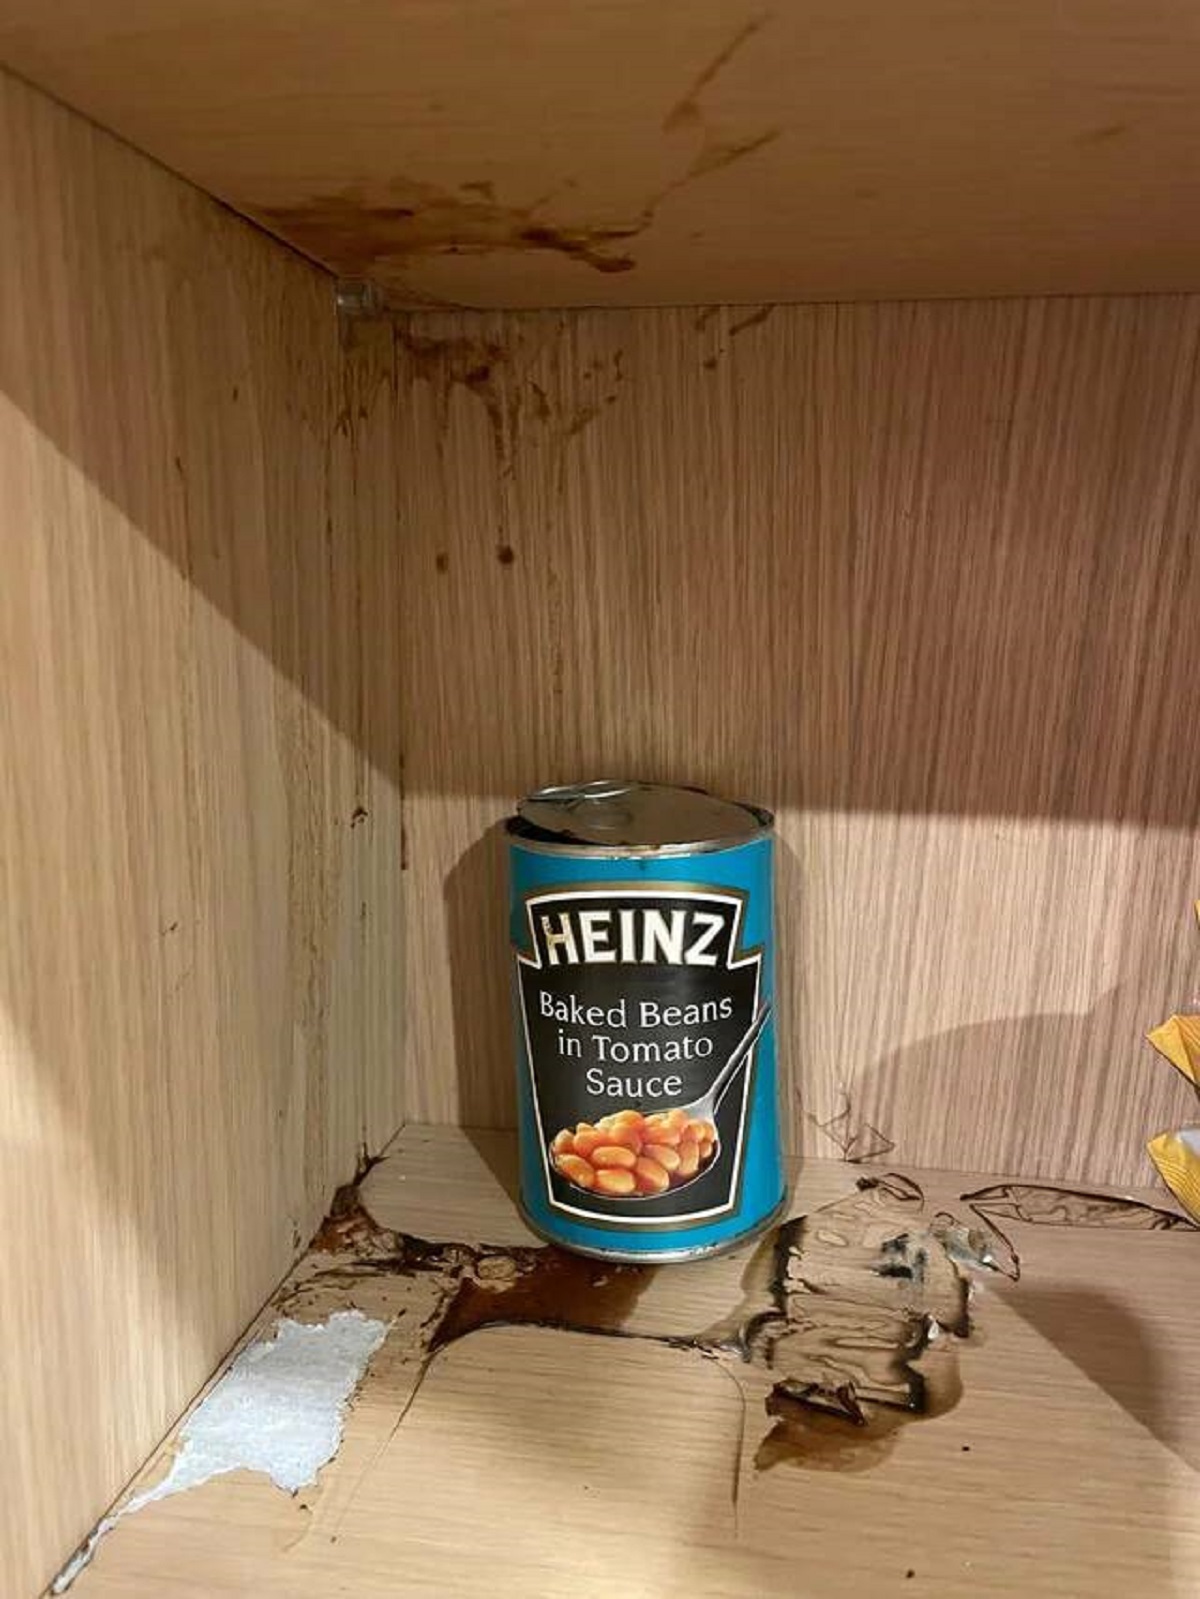 drink - Heinz Baked Beans in Tomato Sauce